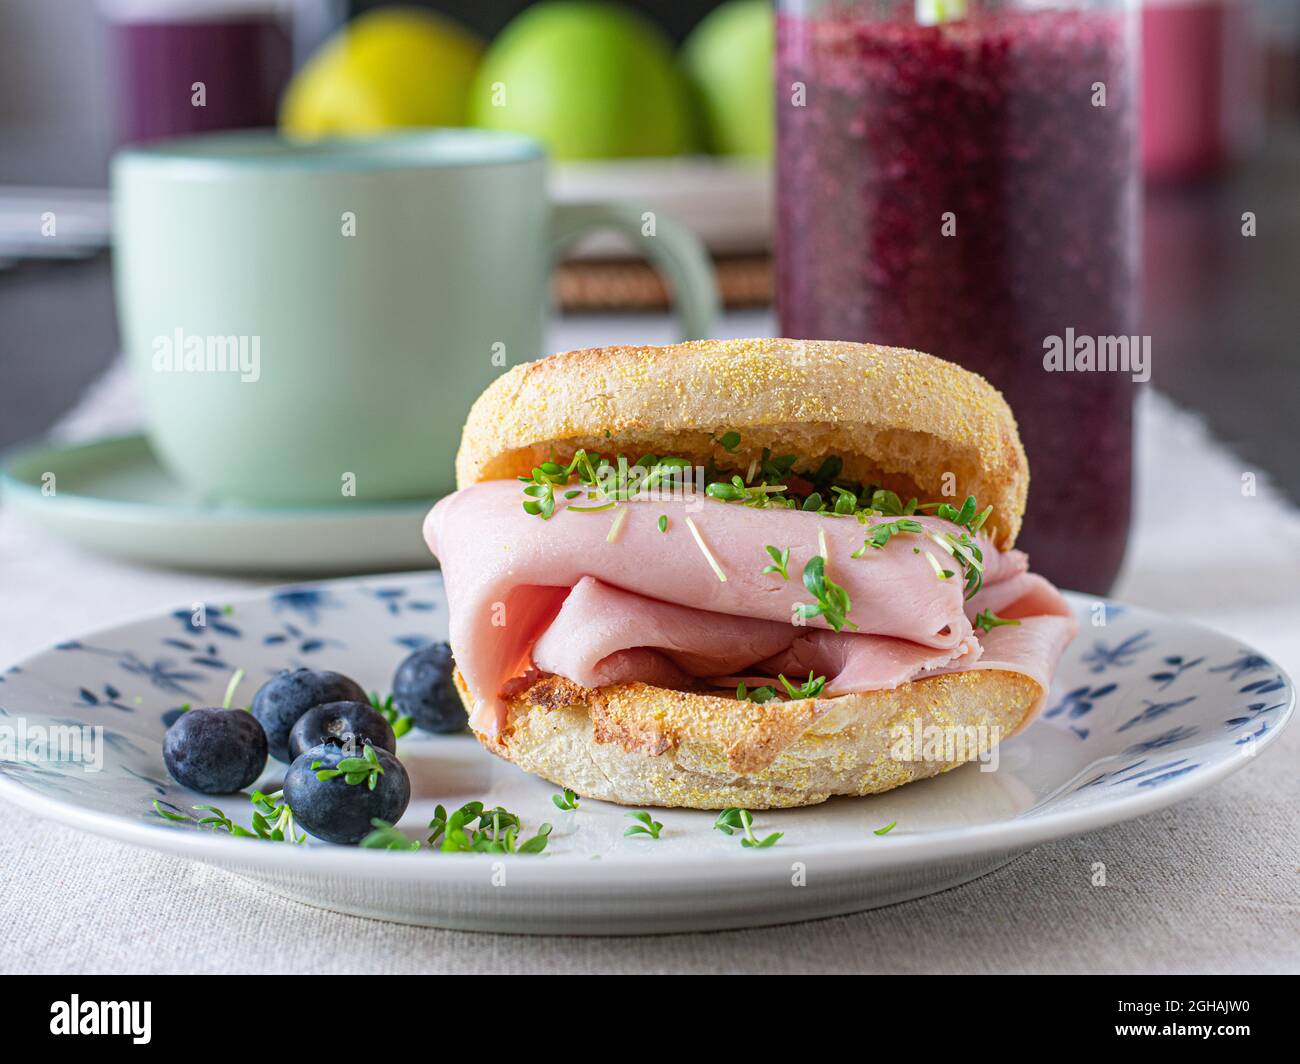 Healthy breakfast sandwich made with toasted english muffin and thin sliced ham served with a fresh blueberry smoothie and a cup of coffee on a table Stock Photo